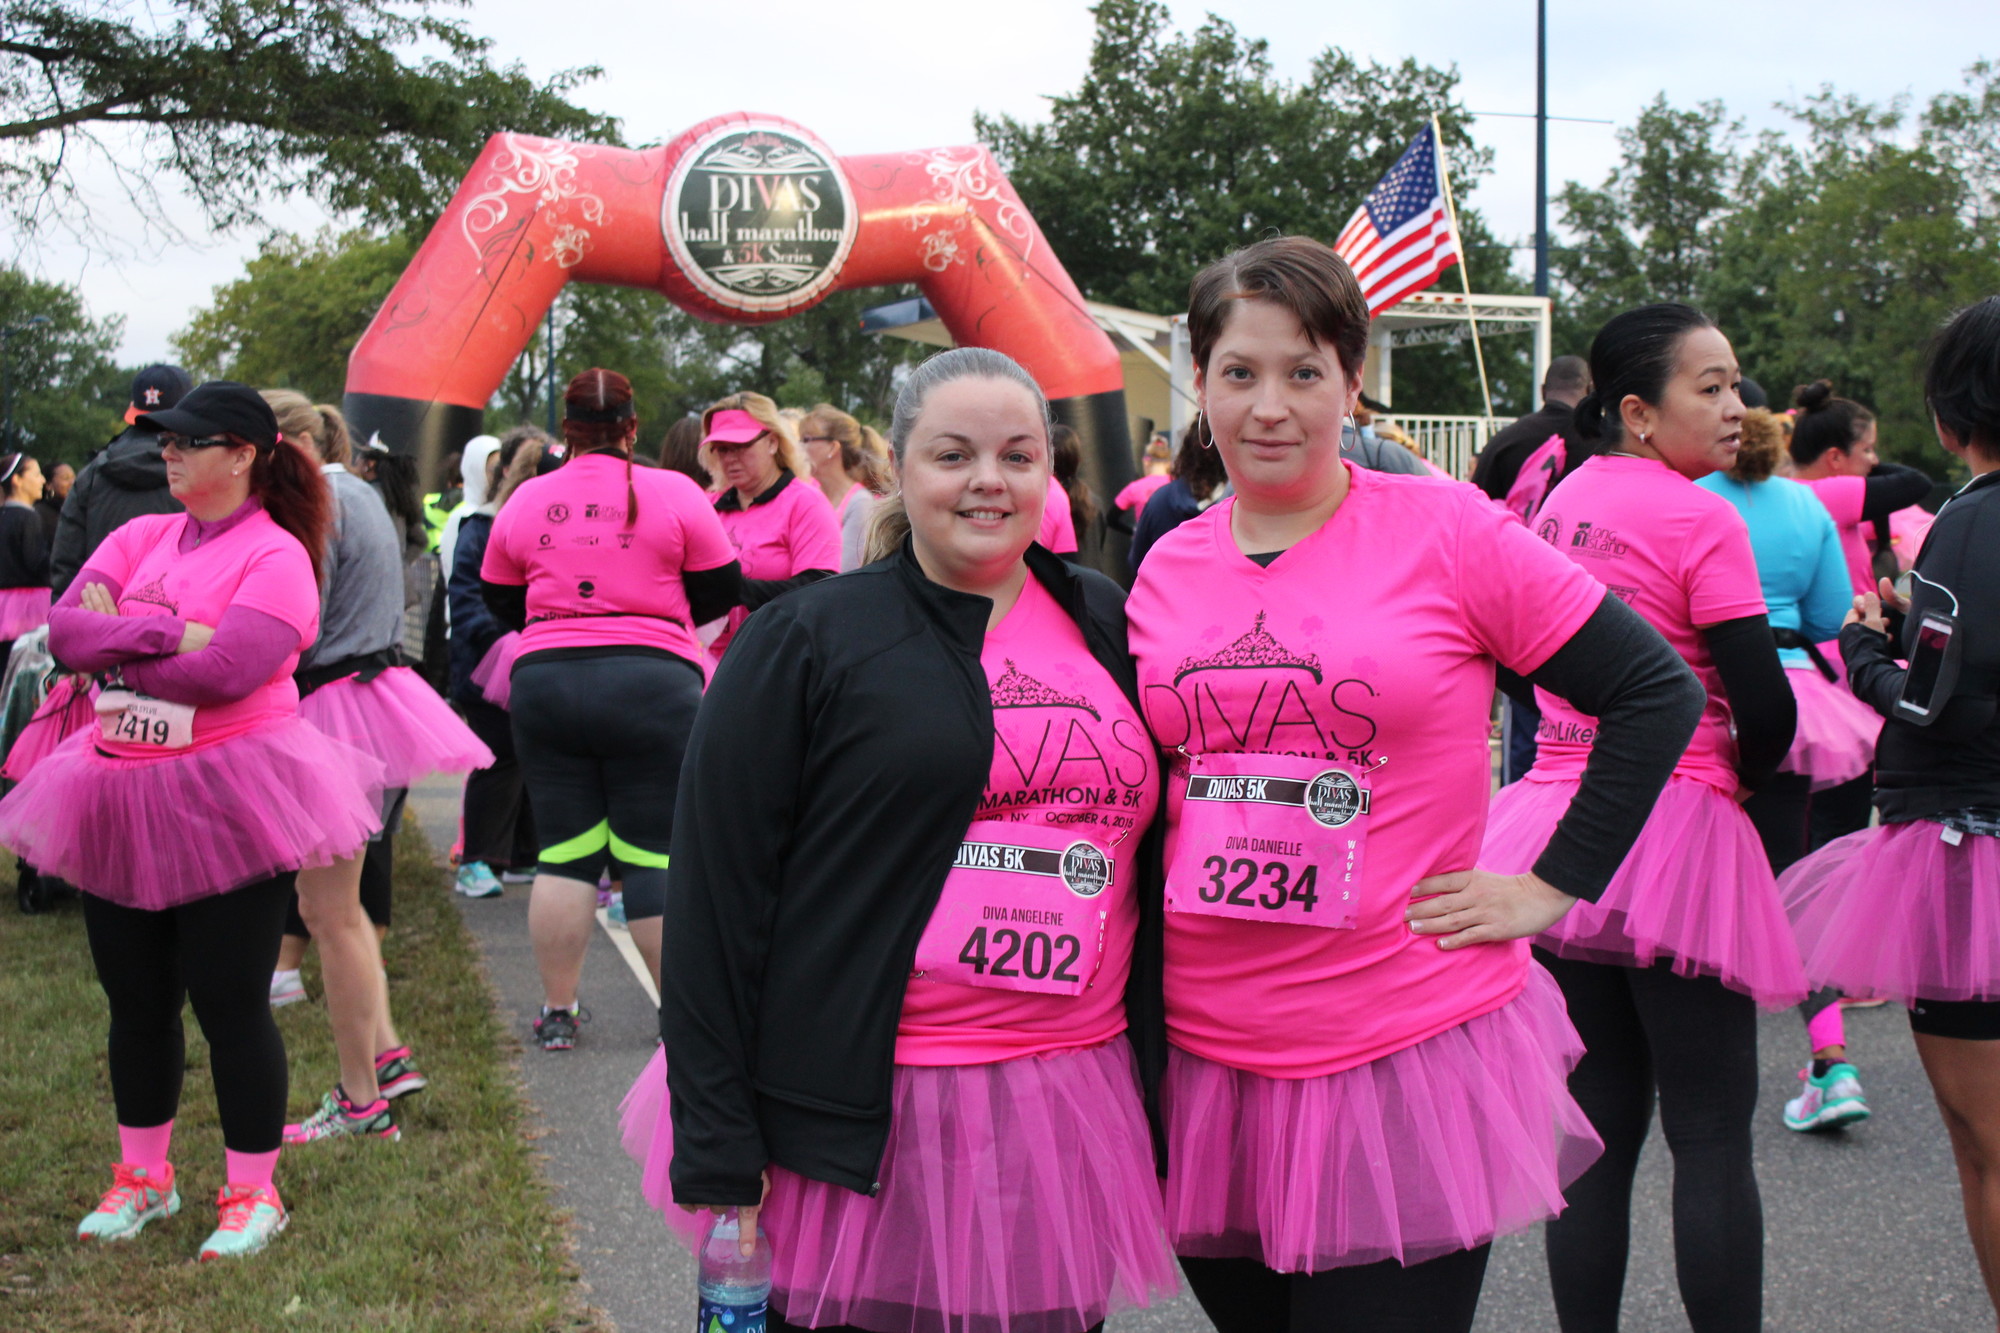 Coworkers Angelene and Danielle participated in the run.